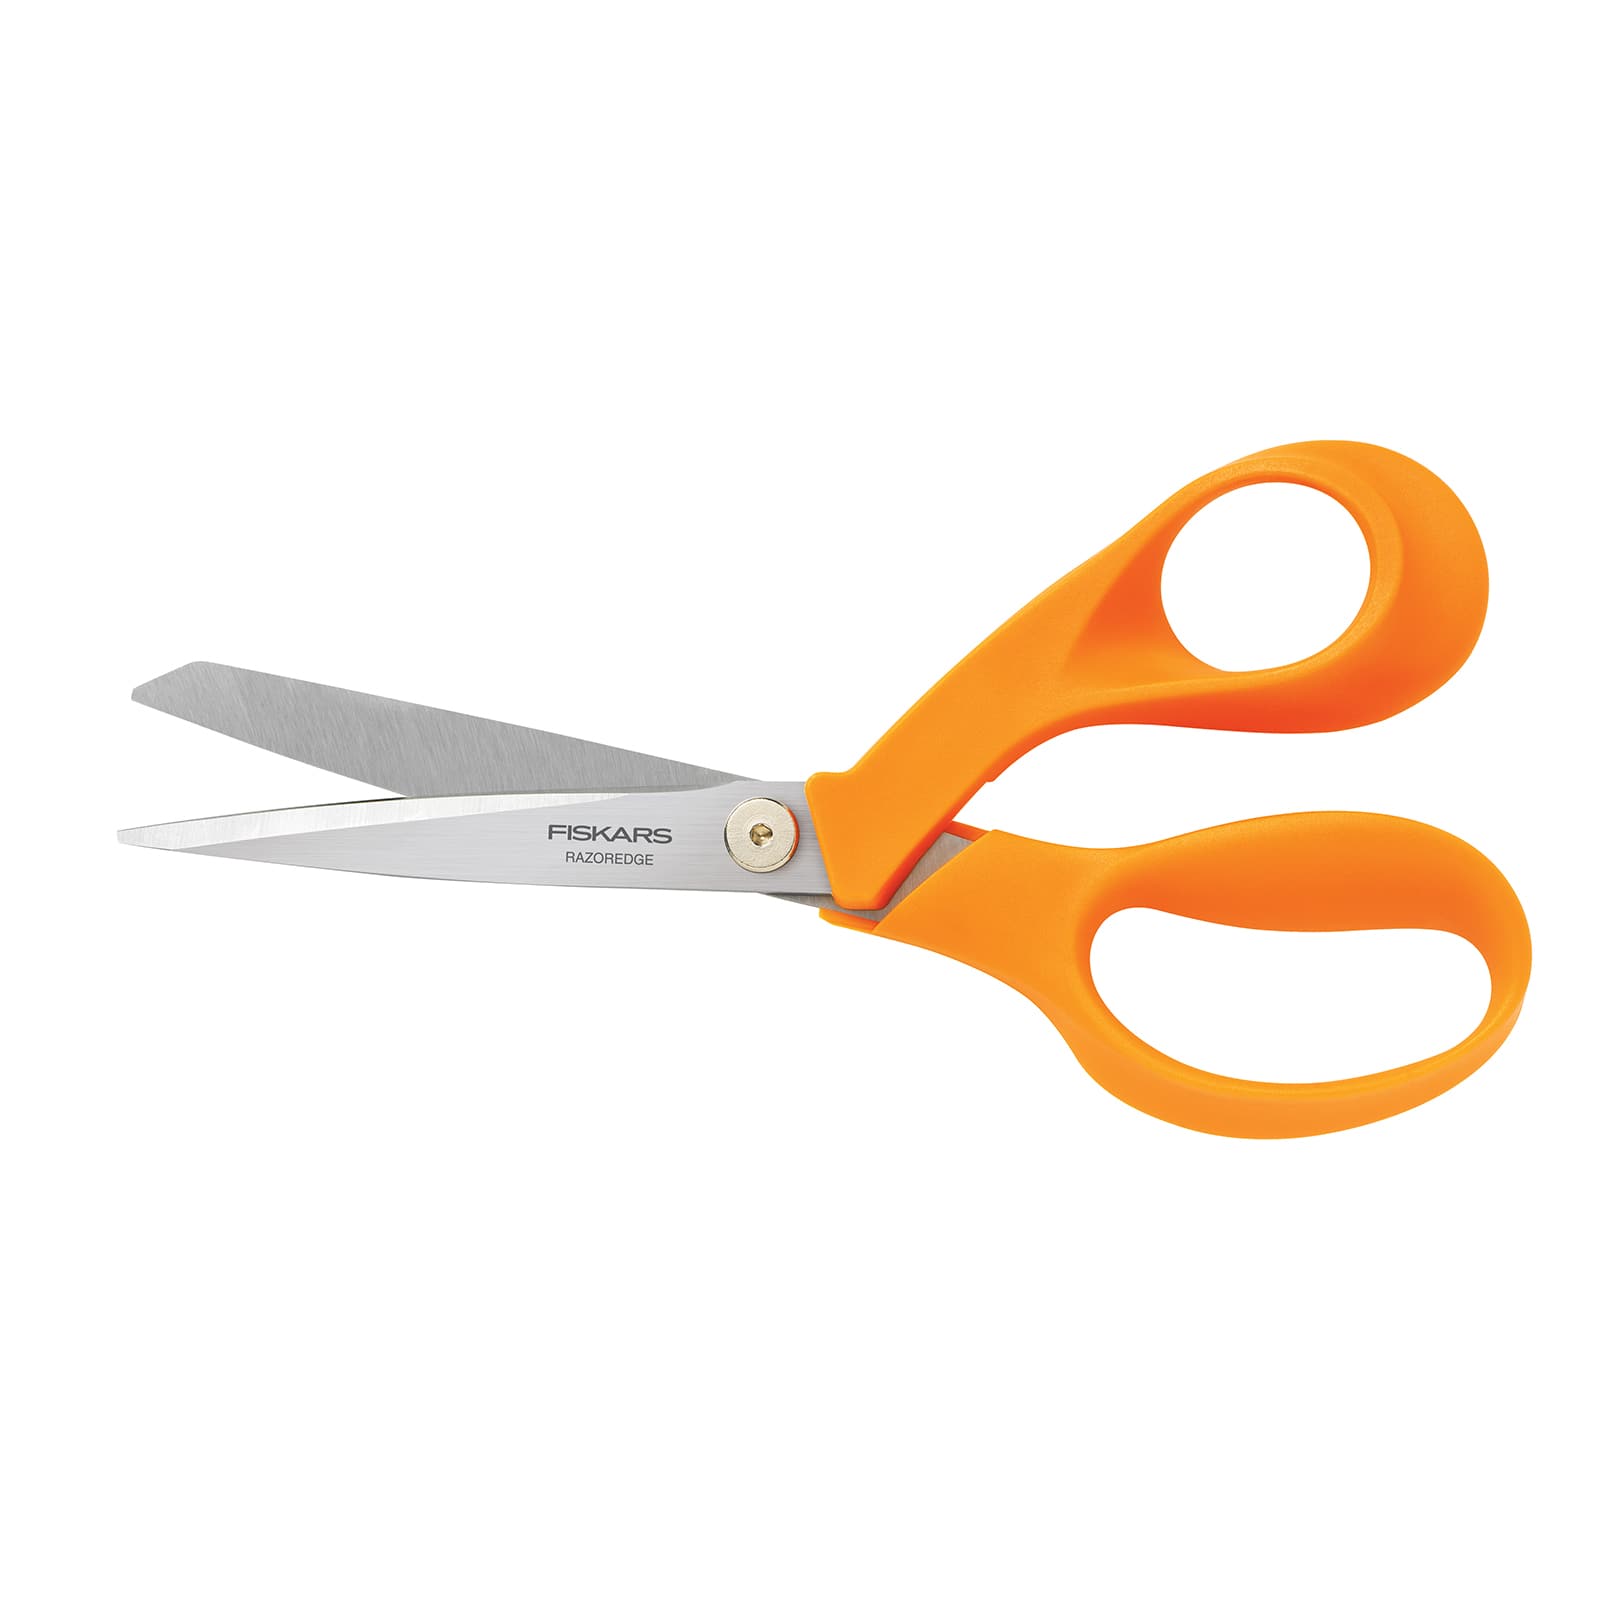 Professional 8.5 Stainless Steel Sharp Sewing Scissors – Isee fabric